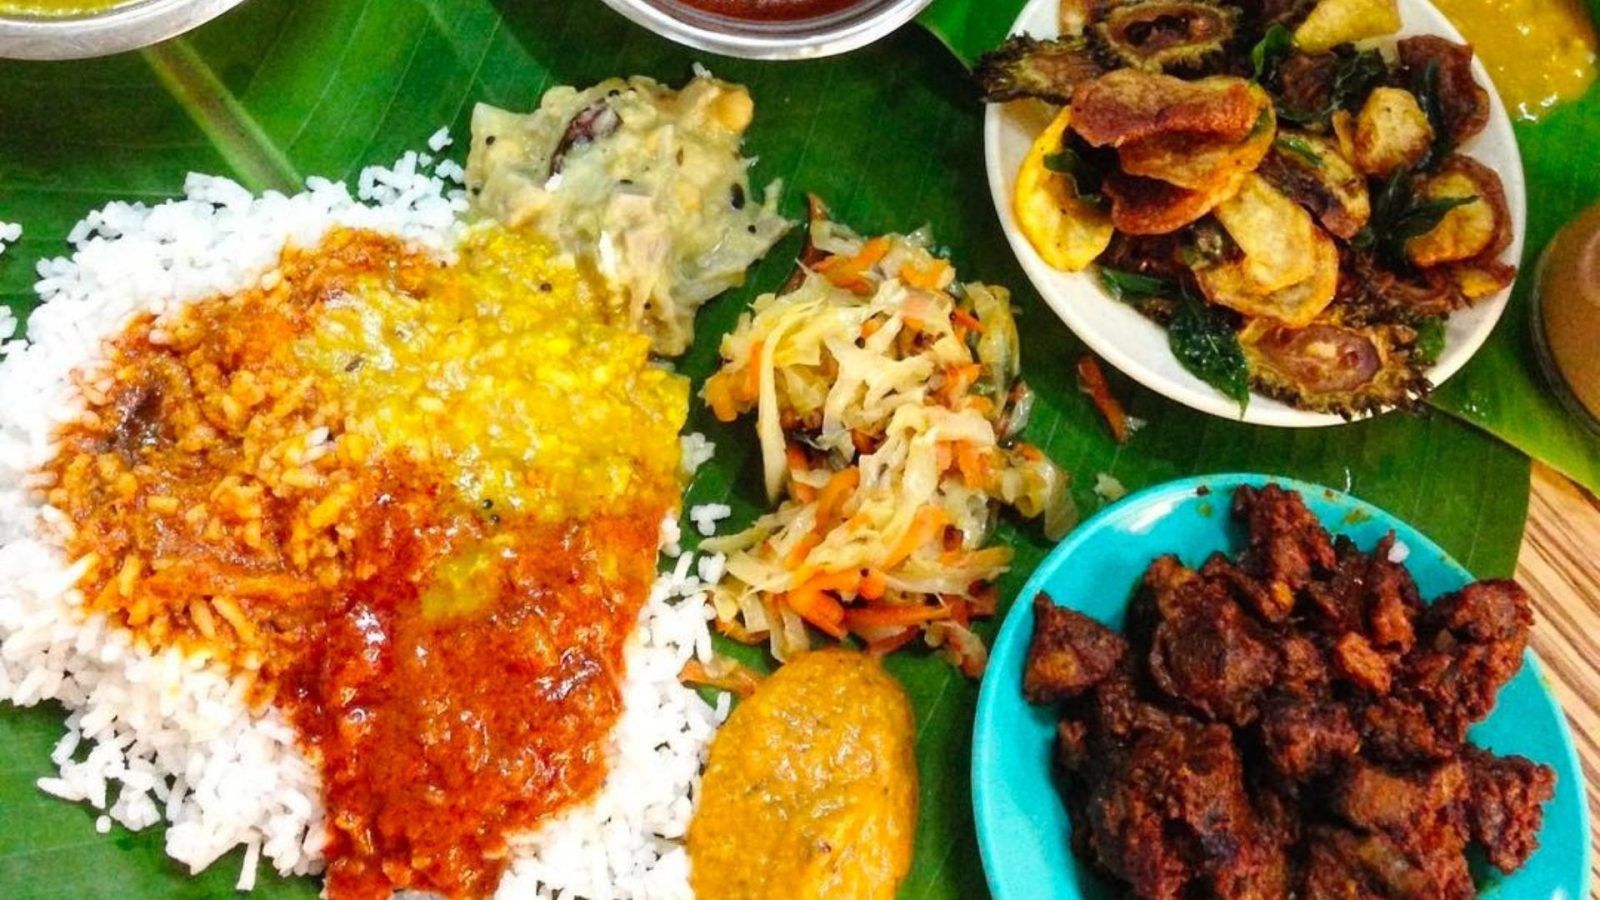 A Definitive Guide To The Best Banana Leaf Rice In KL And Selangor